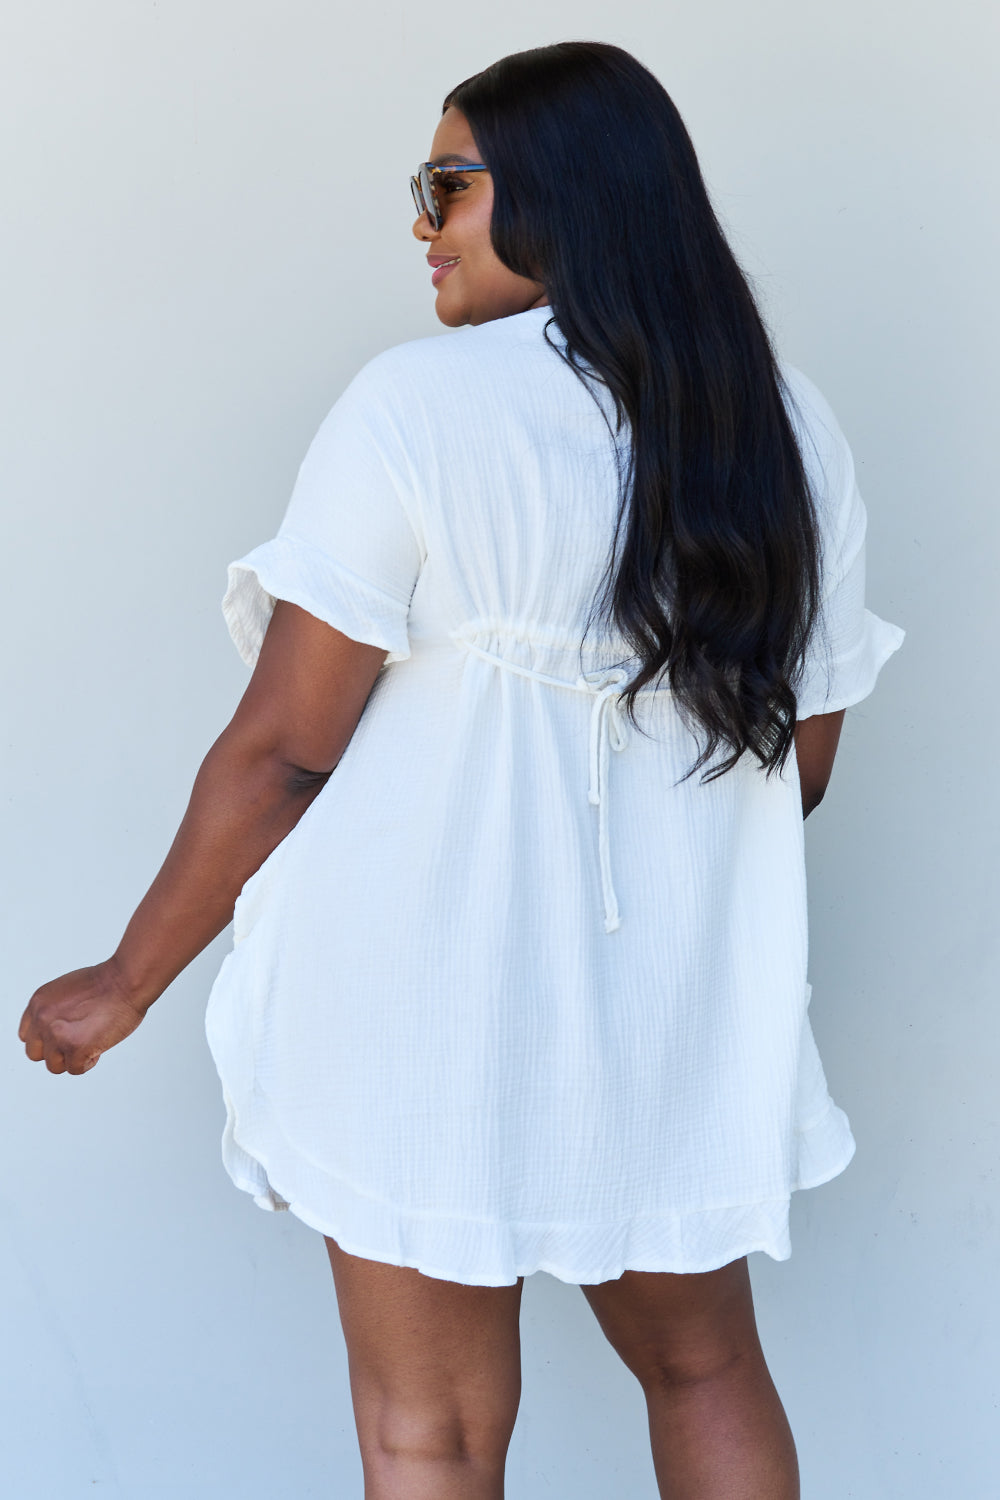 Out Of Time Full Size Ruffle Hem Dress with Drawstring Waistband in White - All Dresses - Dresses - 8 - 2024